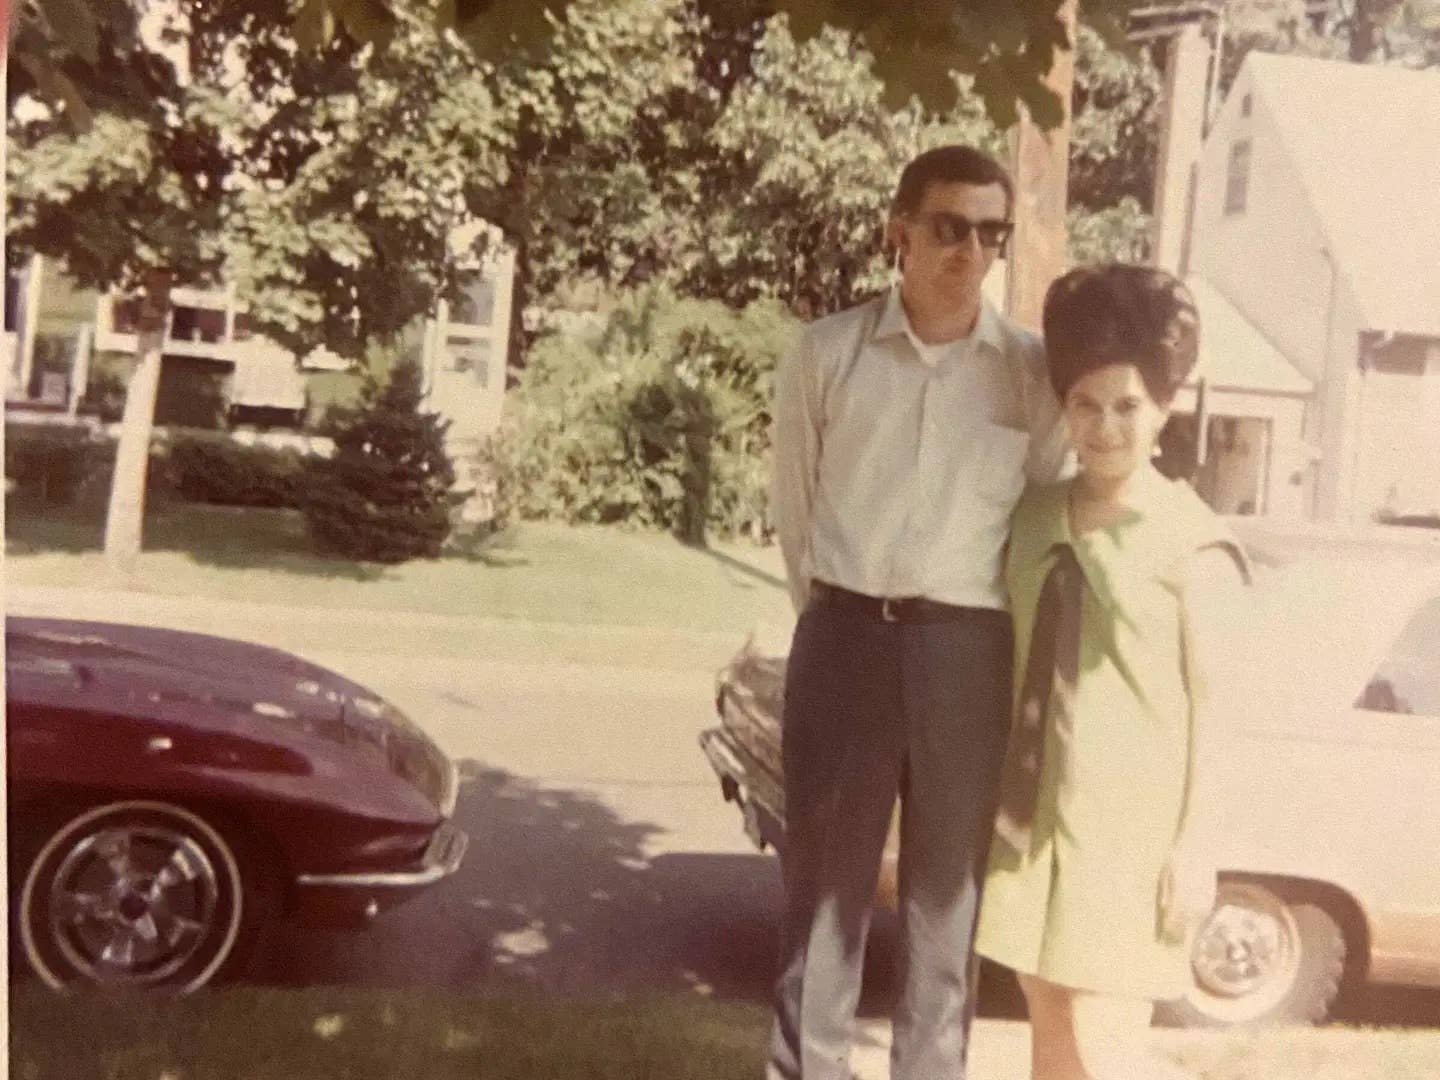 Dad and Mom during their carefree pre-kids days.